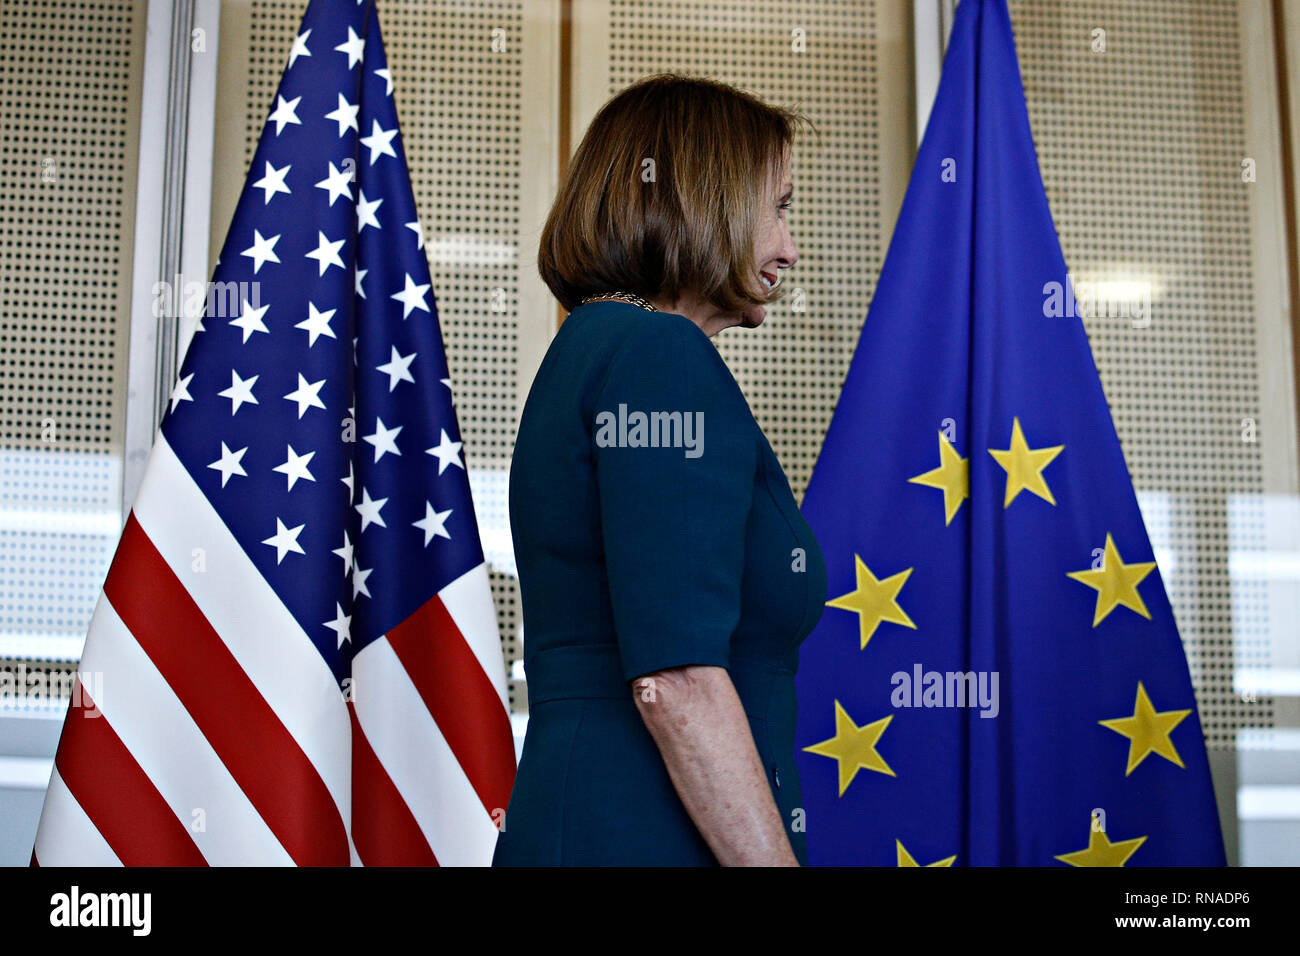 Brussels, Belgium. 18th Feb, 2019. President of the European Commission Jean-Claude Juncker meets with a Speaker of the United States House of Representatives Nancy Pelosi. Credit: ALEXANDROS MICHAILIDIS/Alamy Live News Stock Photo